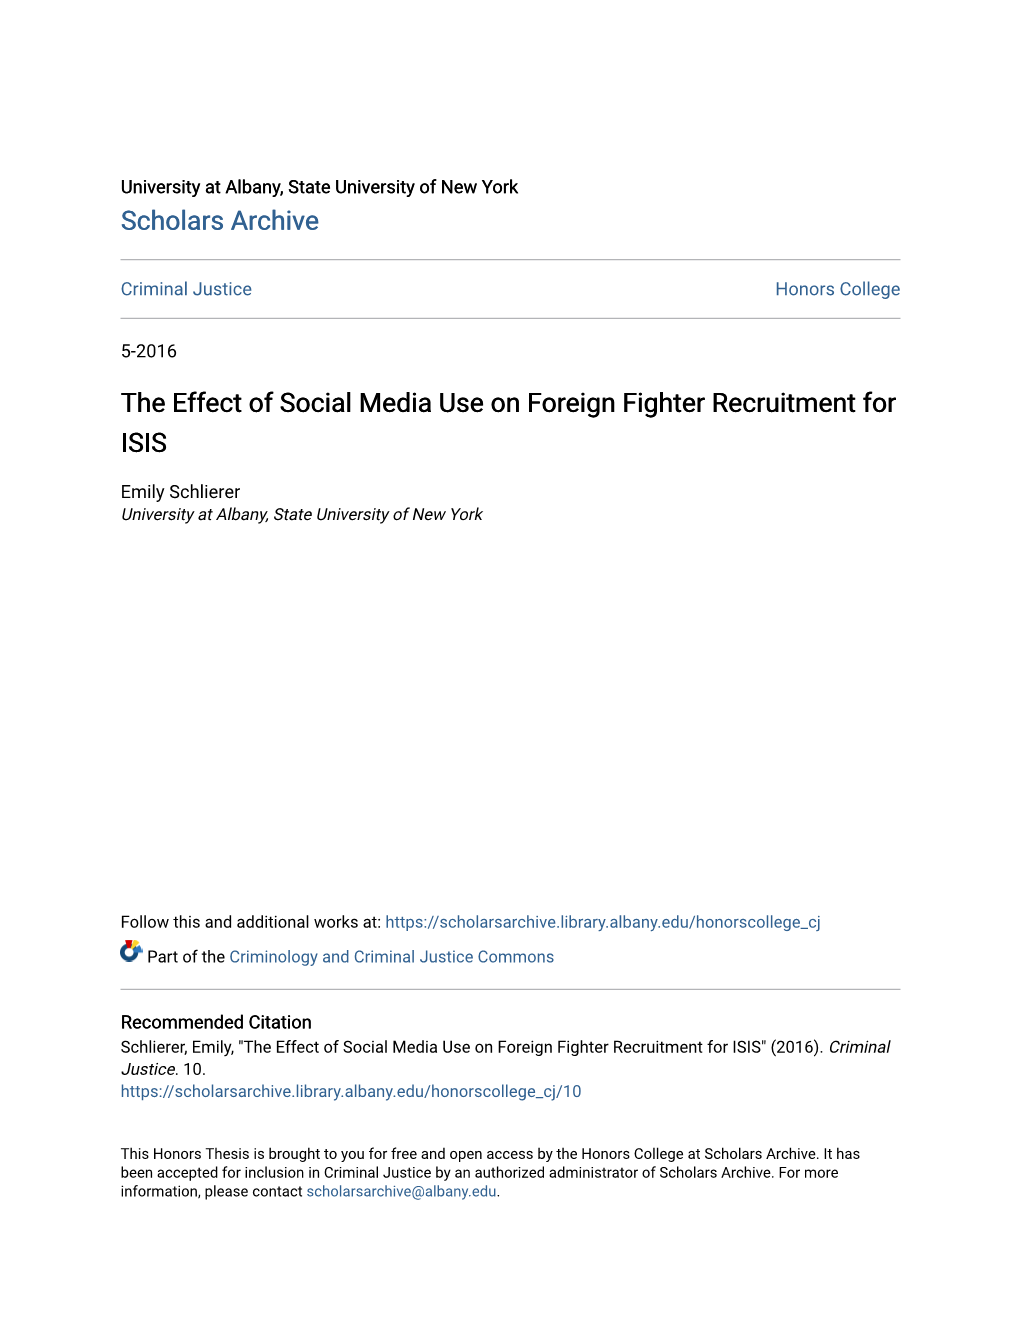 The Effect of Social Media Use on Foreign Fighter Recruitment for ISIS